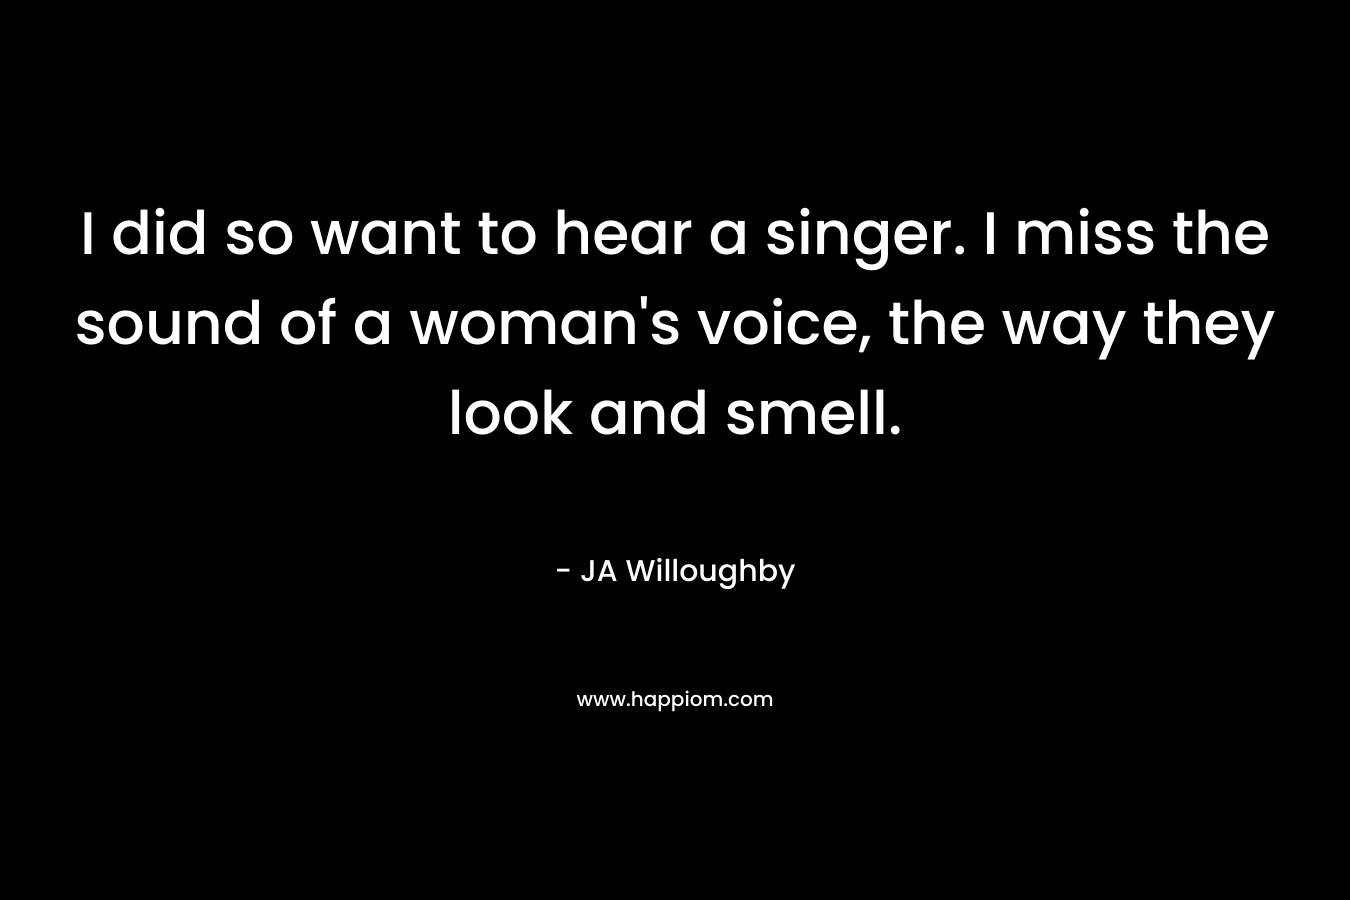 I did so want to hear a singer. I miss the sound of a woman’s voice, the way they look and smell. – JA Willoughby